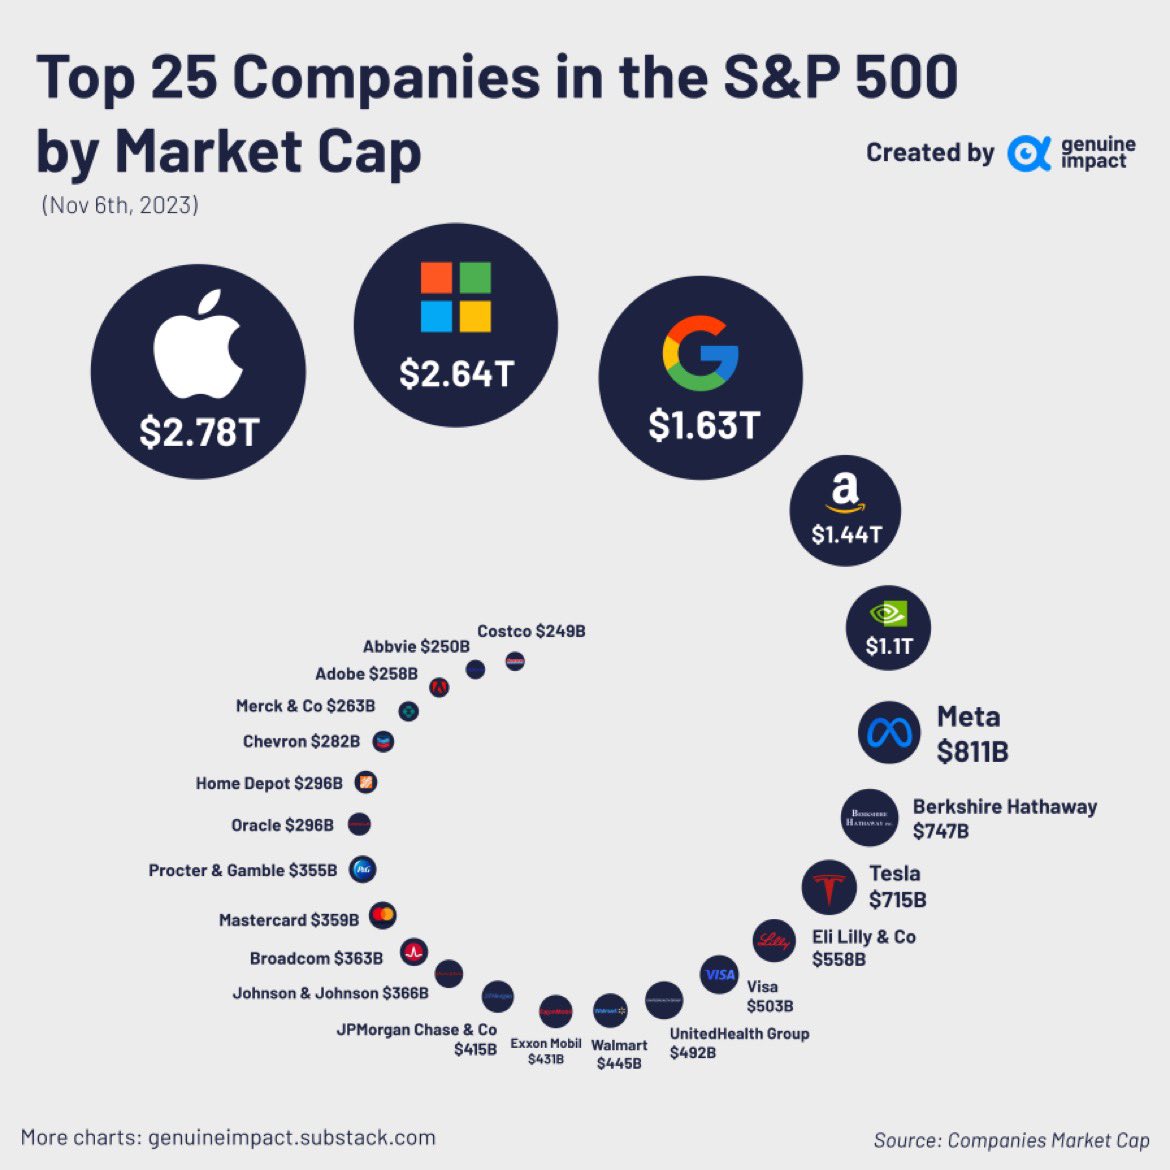 What are the🔝25 Companies in the S&P 500 by Market Cap❓ ➡️🍎Apple remains the company with the highest market capitalization within the S&P 500, surpassing $ 2T❗️ 🧩Nvidia in particular has had a very good year👌 ما هي أهم 25 شركة من حيث القيمة السوقية بحسب مؤشر S&P 500…